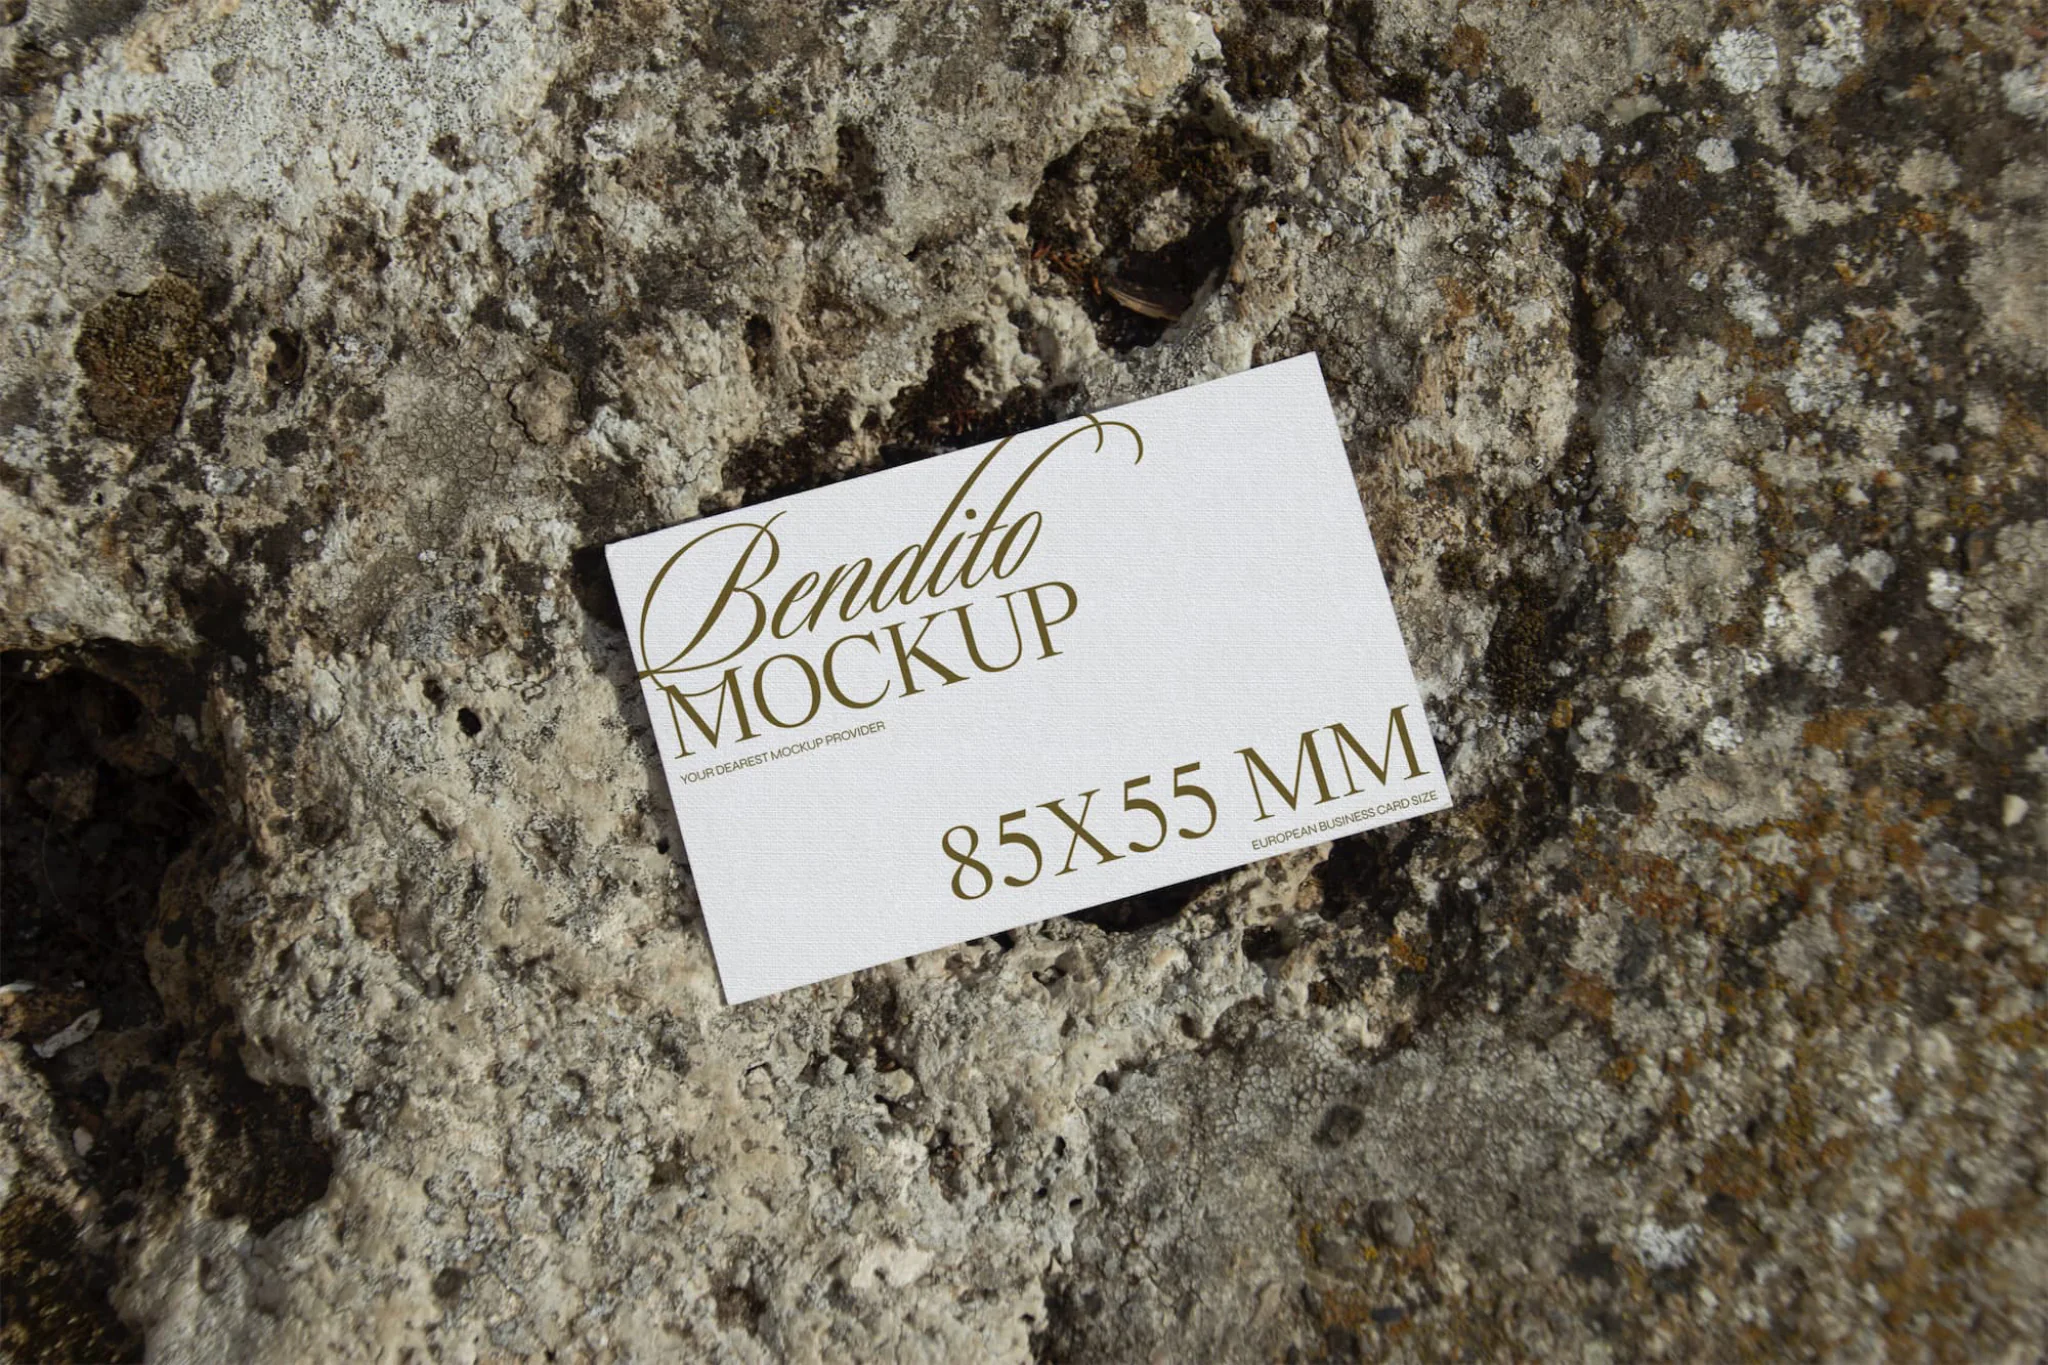 Business card mockup over natural stone background.